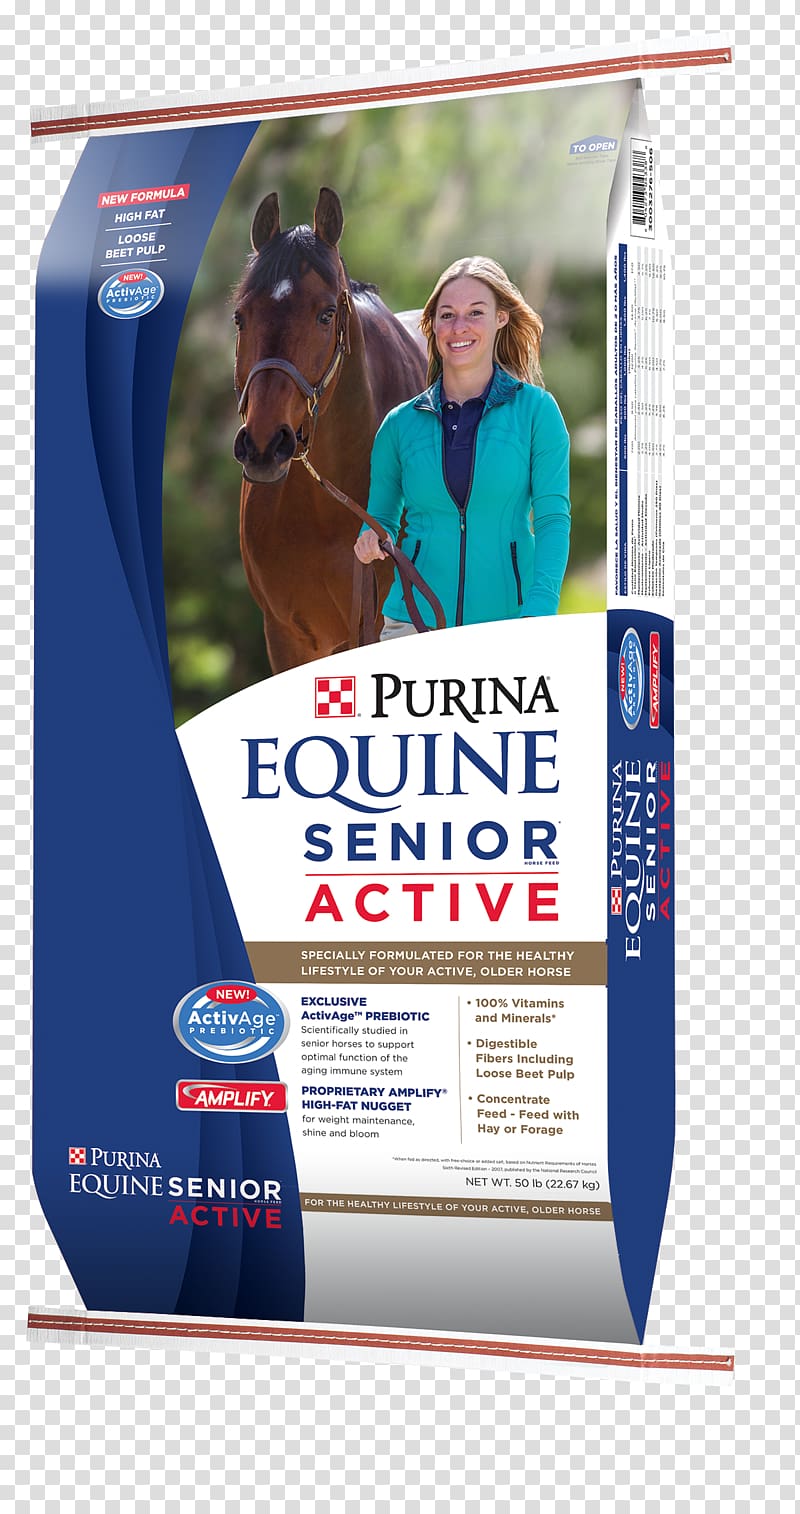 Horse Equine nutrition Foal Nestlé Purina PetCare Company Purina Mills, horse transparent background PNG clipart